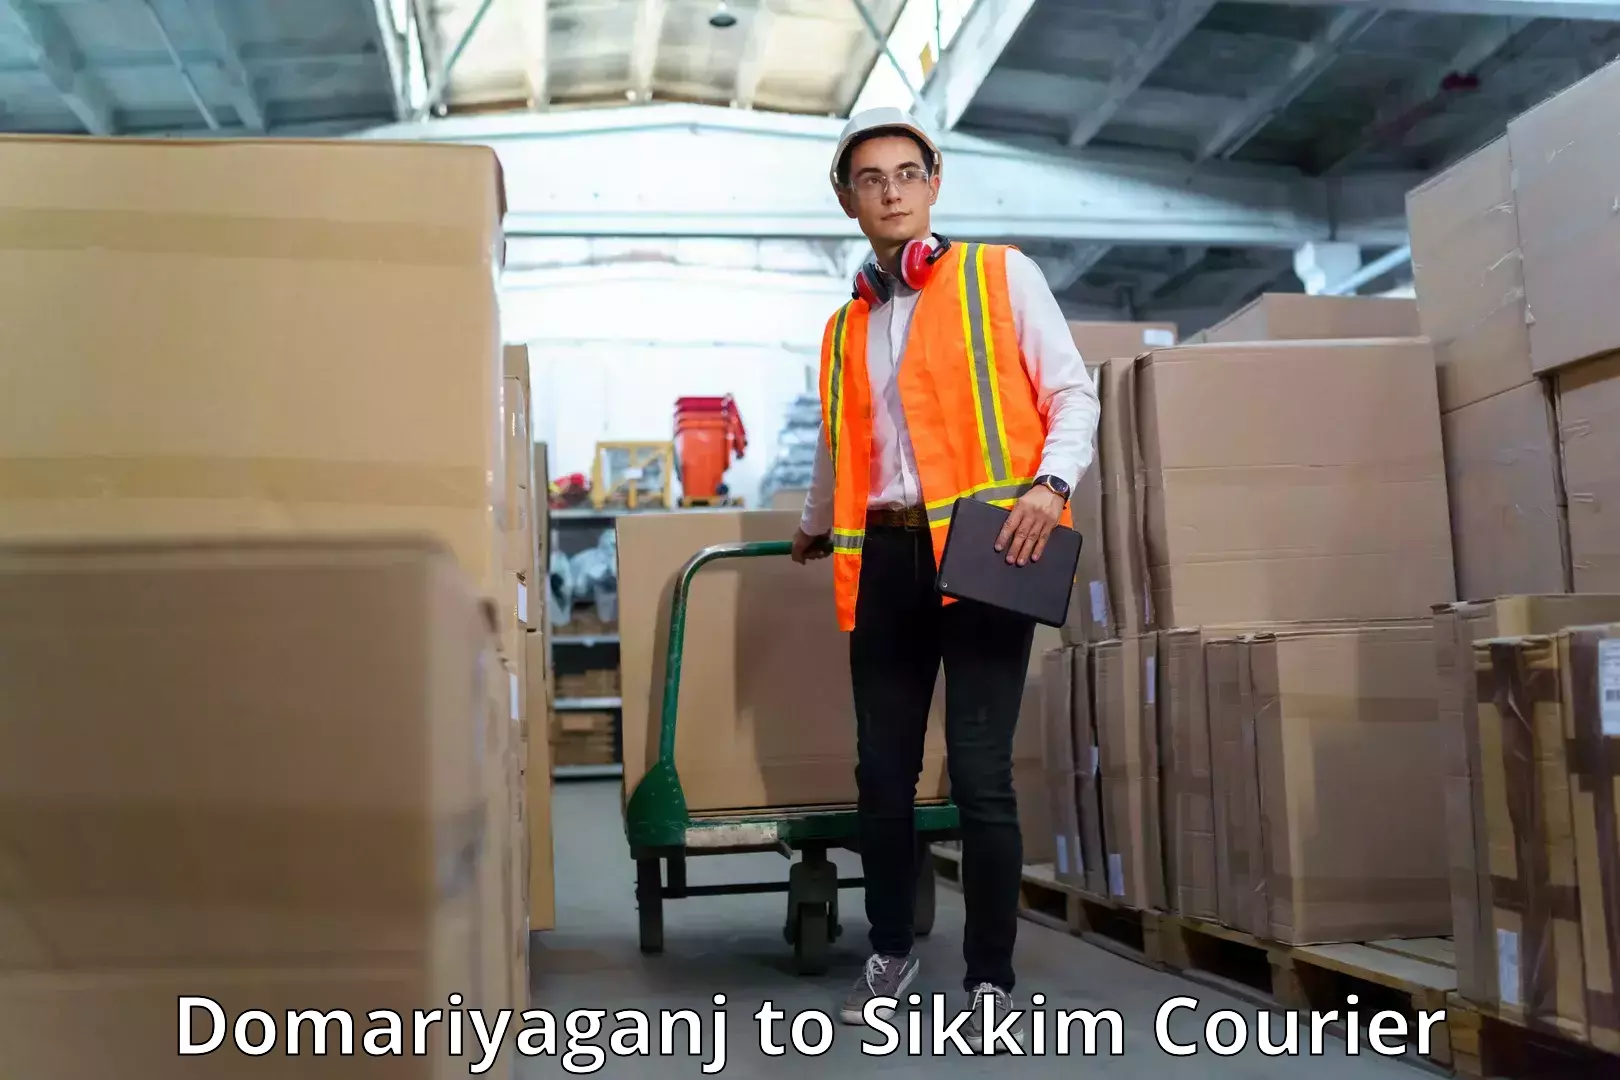 Subscription-based courier Domariyaganj to Sikkim